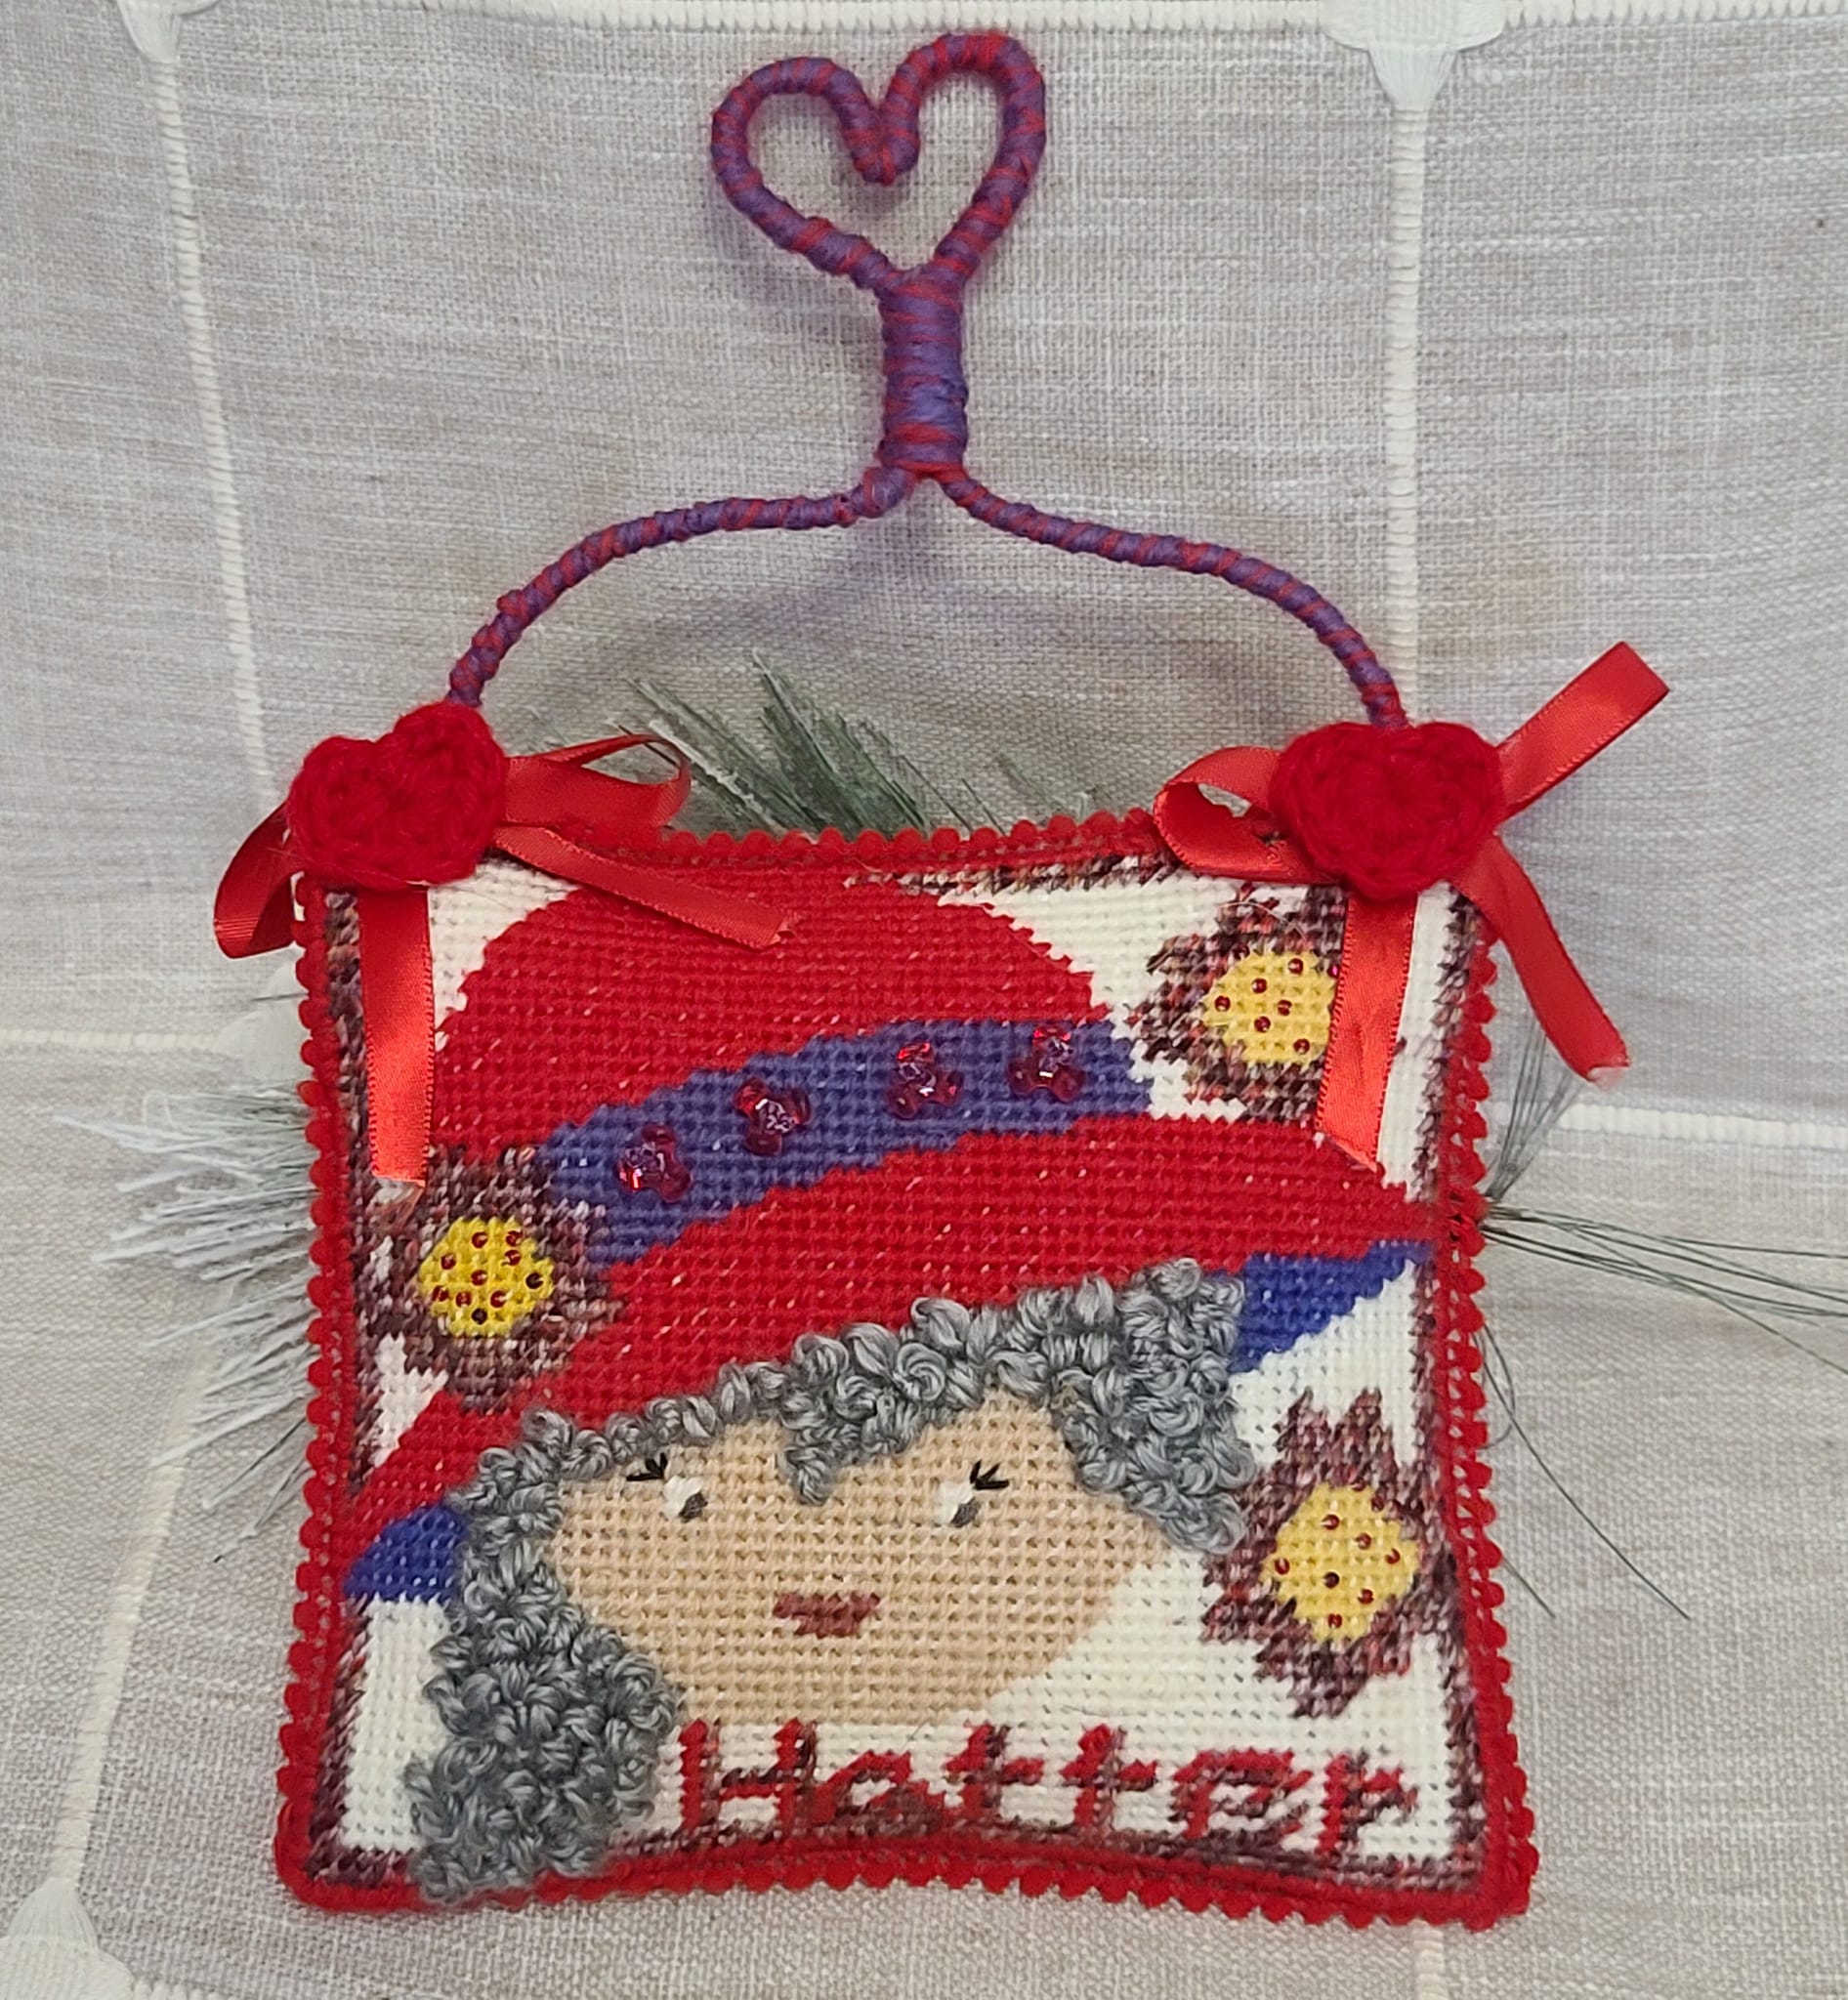 Needlepoint Red Hat Lady pillow hanger ornament